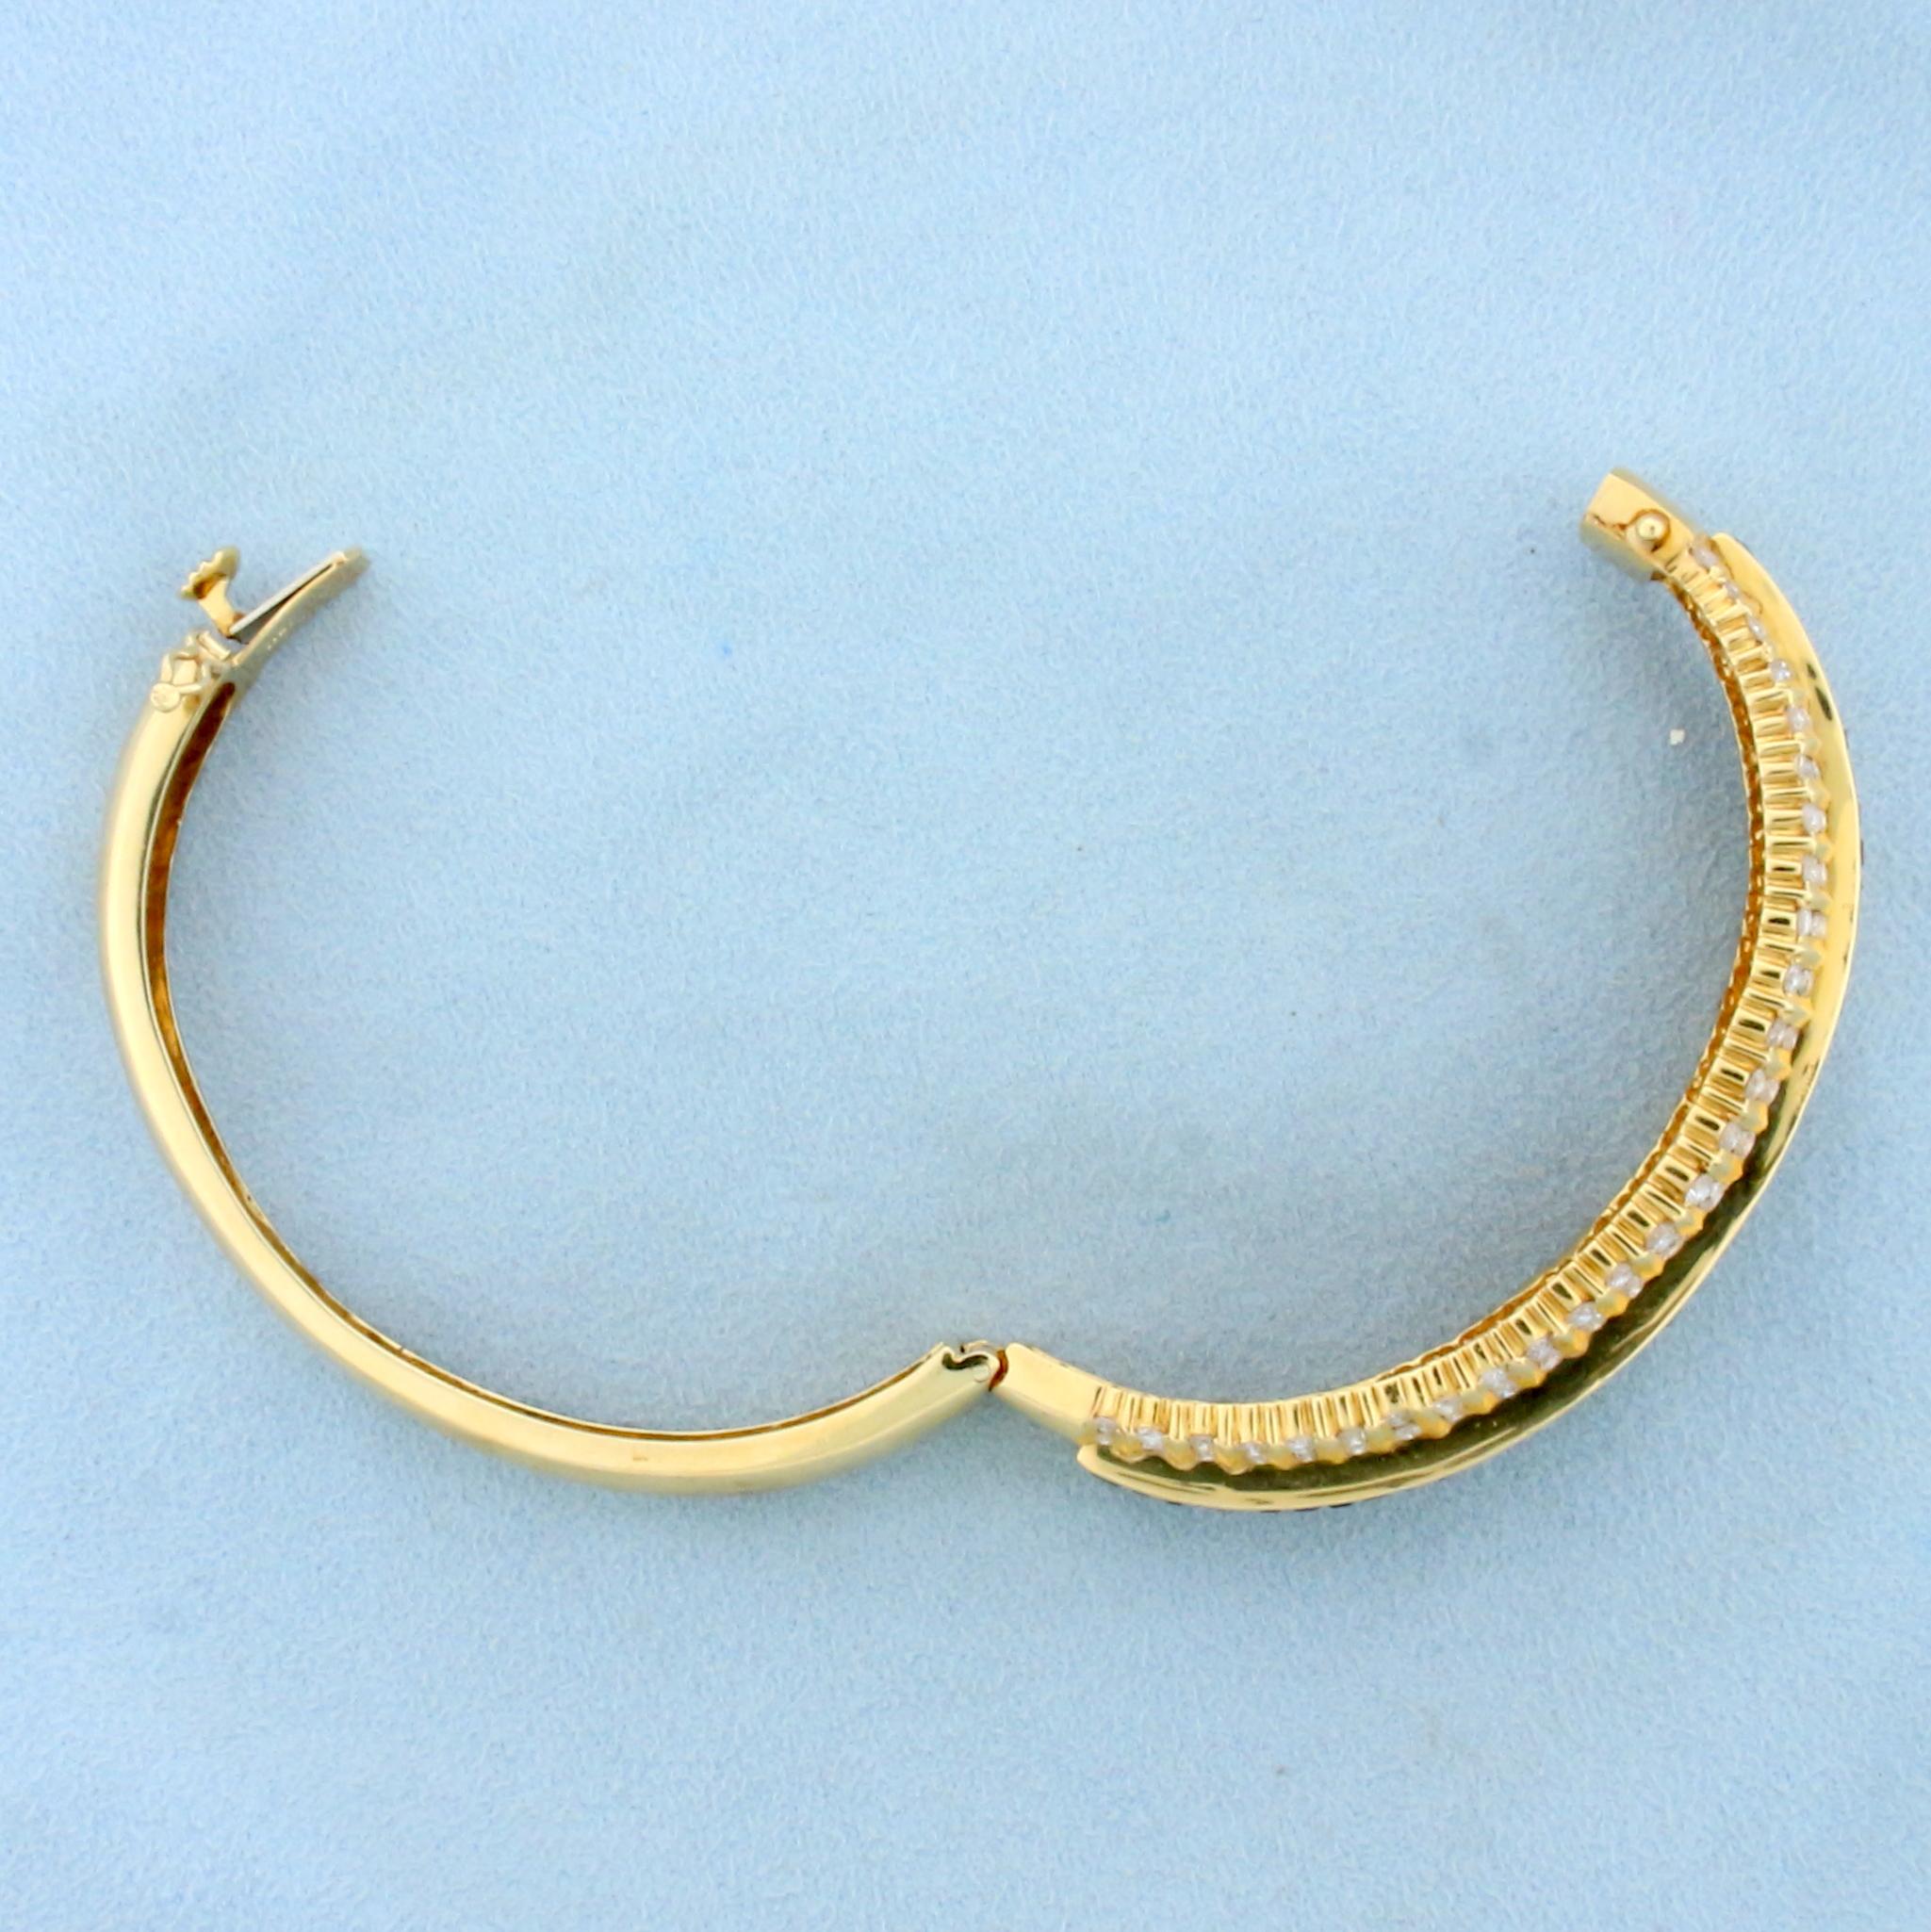 Designer 5ct Tw Natural Sapphire And Diamond Bangle Bracelet In 18k Yellow Gold